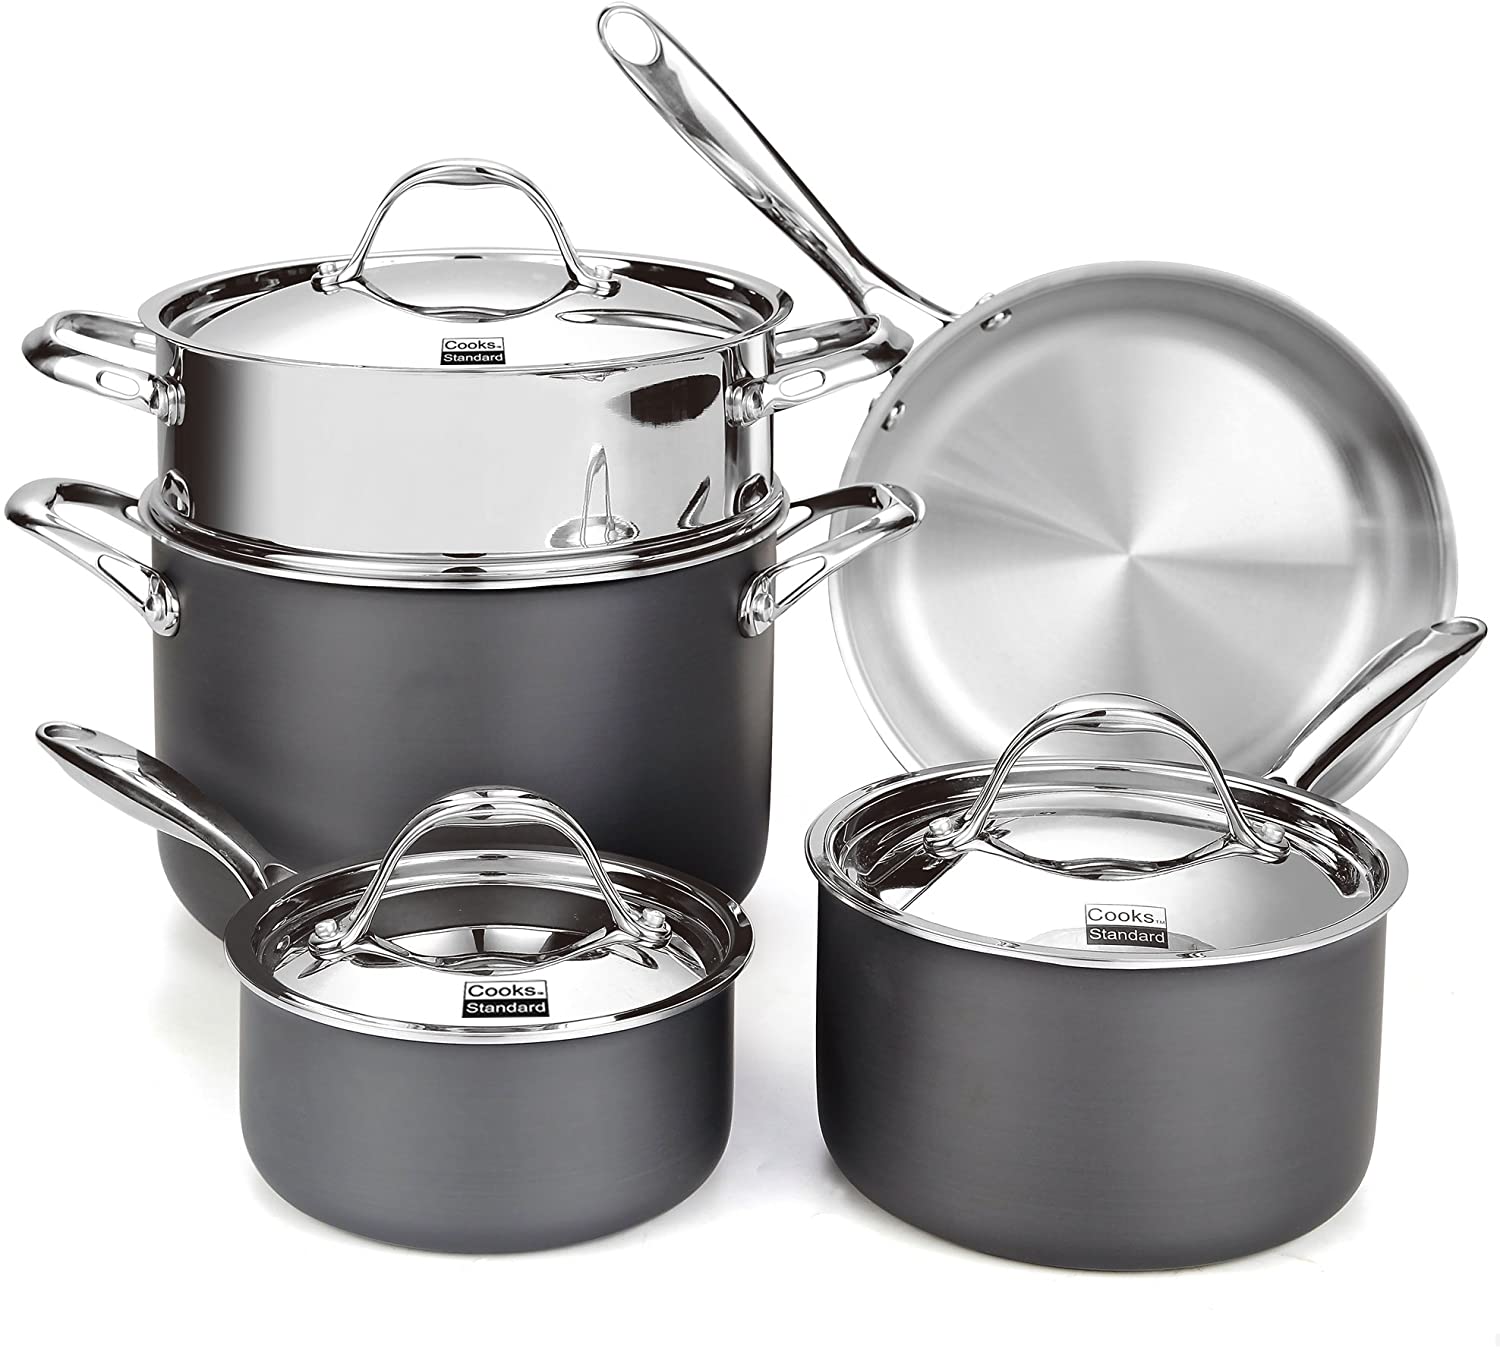 Cook N Home 8pc aluminum Cookware Set, grey color with black